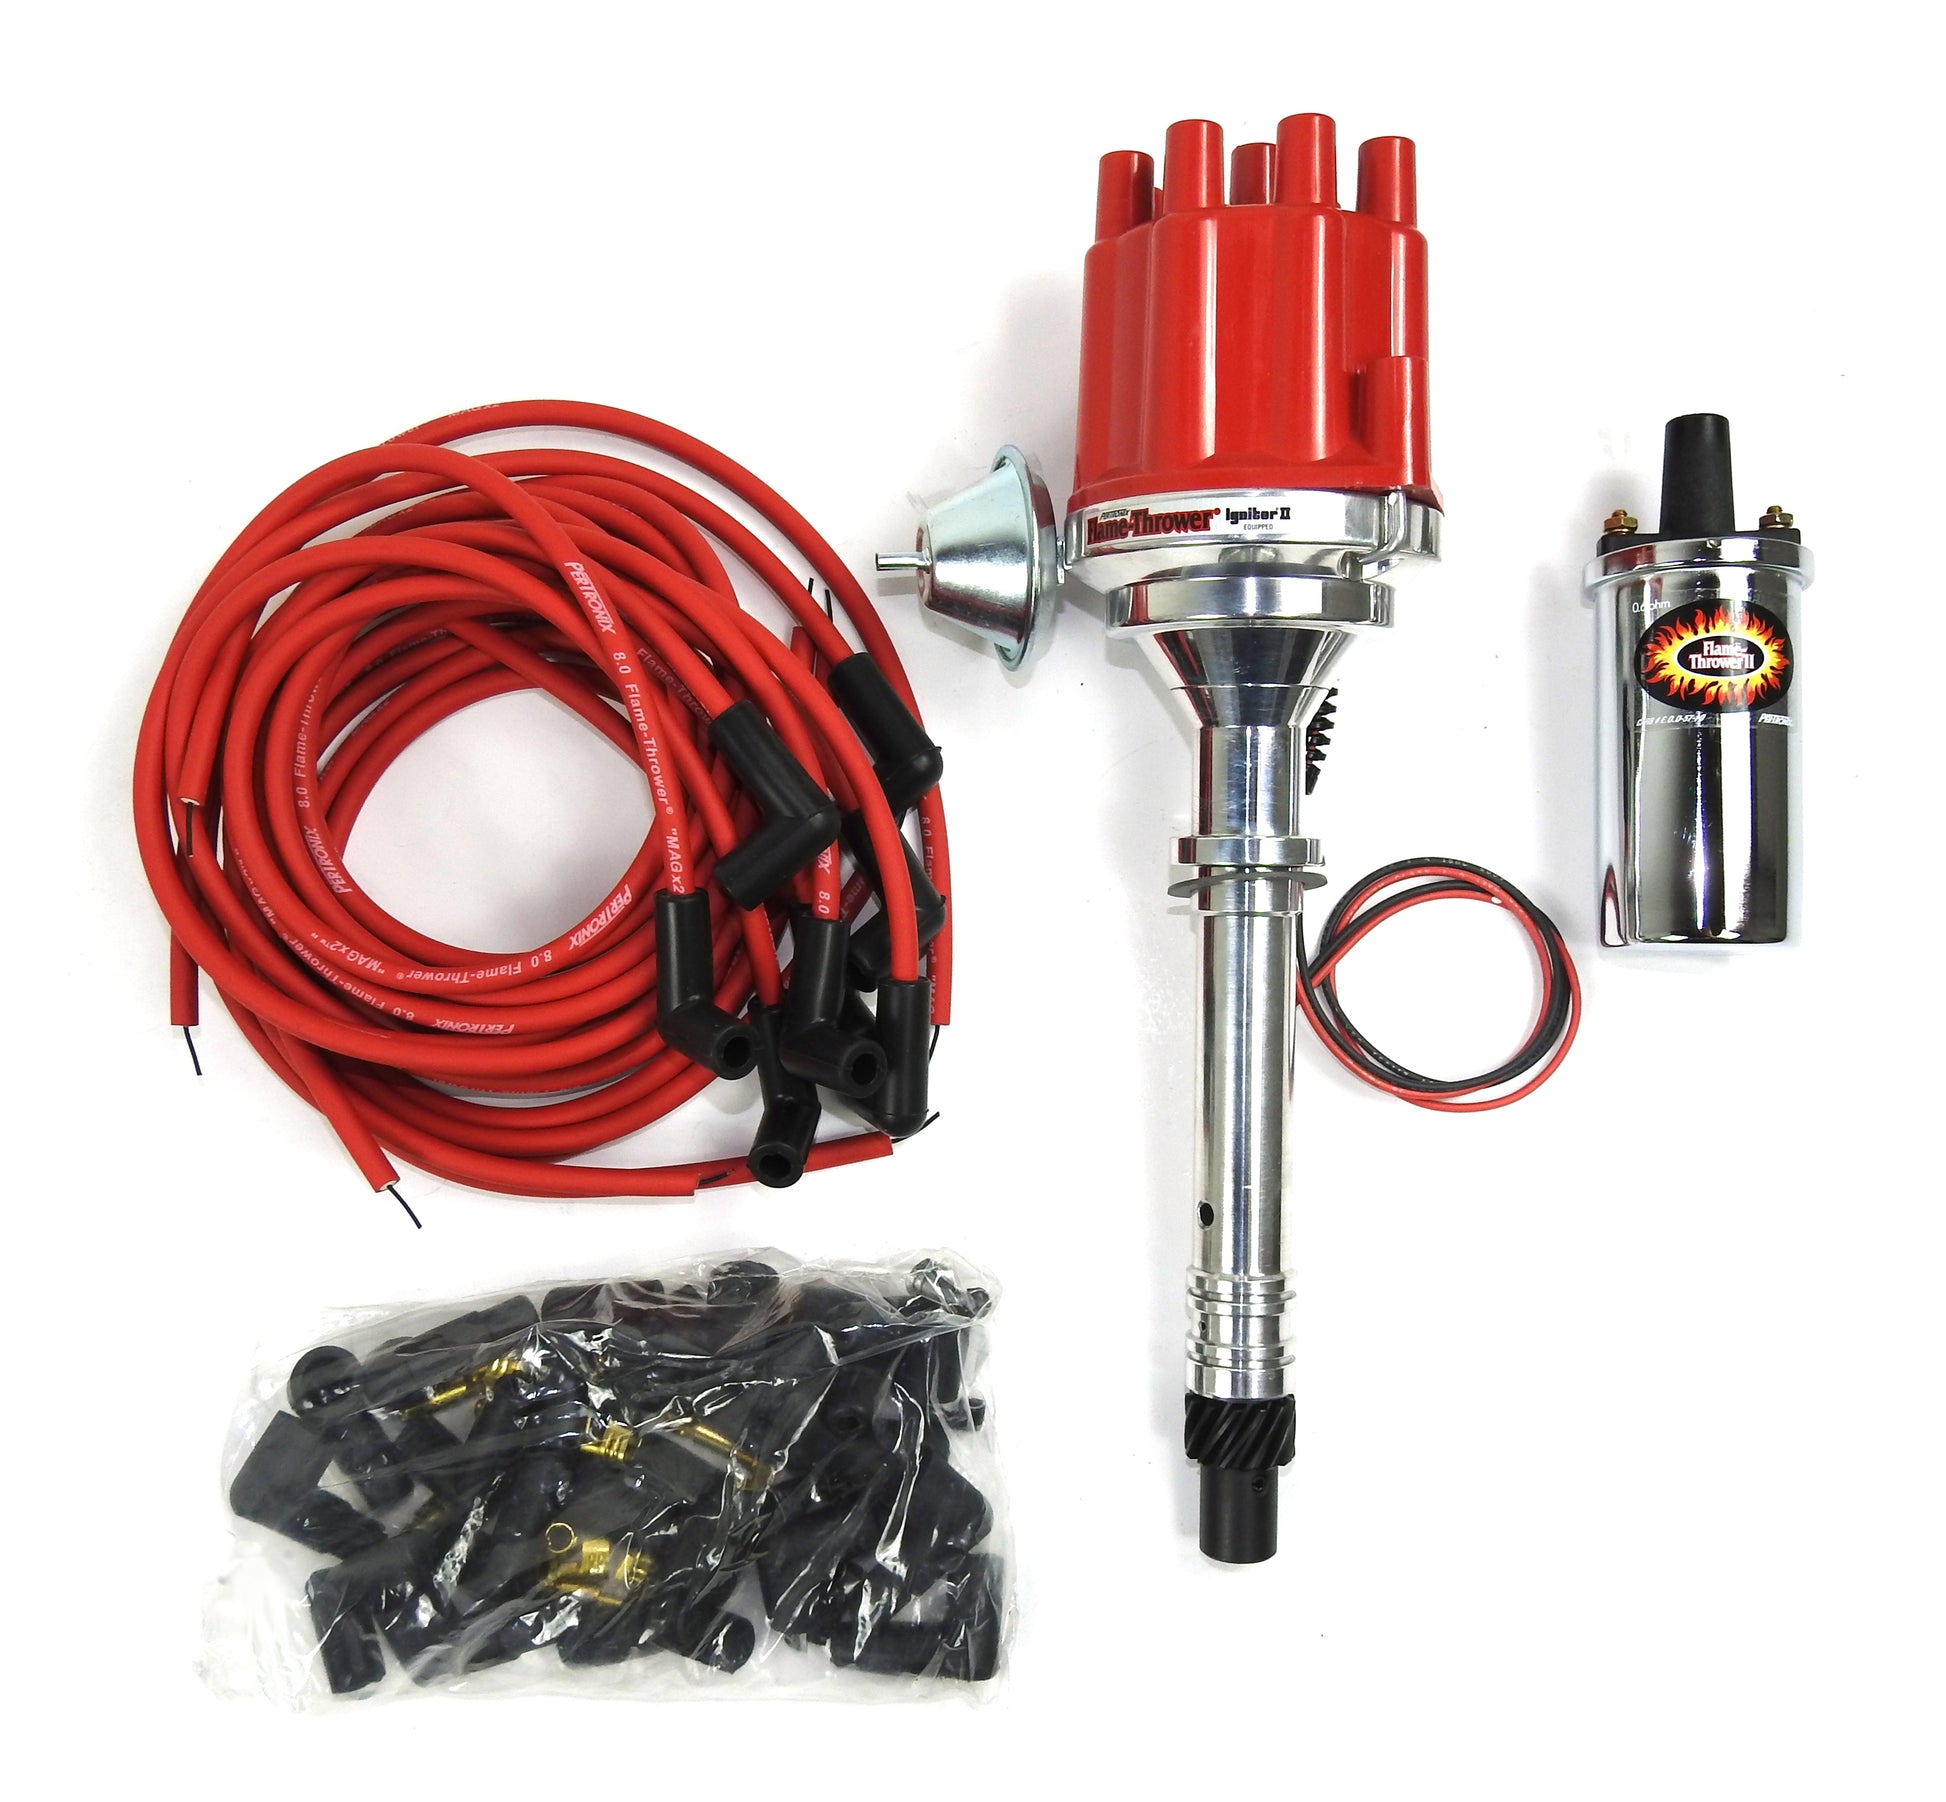 Pertronix Bundle005 Ignition Kit includes Chevy SB/BB Billet Plug n Play Distributor with Red Female Cap, Flame-Thrower II Chrome Coil, Flame-Thrower MAGx2 Universal Red Spark Plug Wires with 90 degree plug boot ends